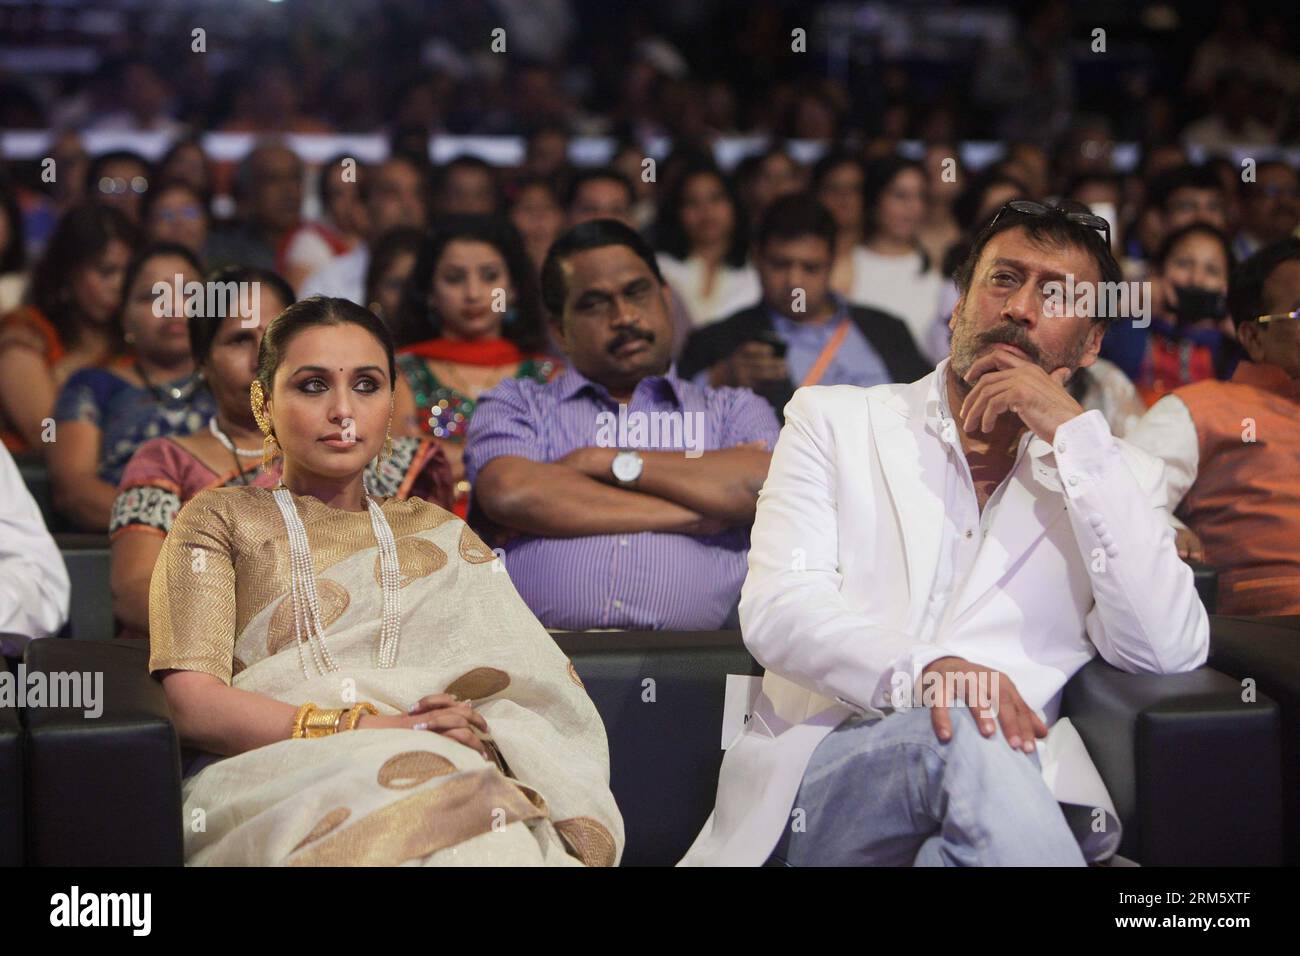 Bildnummer: 60735130  Datum: 20.11.2013  Copyright: imago/Xinhua (131120) -- GOA, Nov. 20, 2013 (Xinhua) -- Indian film actress Rekha and actor Jackie Shroff attend the opening ceremony of the 44th International Film Festival in Panaji, Goa of southwest India, Nov. 20, 2013. The 44th International Film Festival of India started in Panaji of Goa in southwest India on Wednesday. More than 320 films from 75 countries and regions are scheduled to take part in the ten-day event. (Xinhua/Zheng Huansong) INDIA-GOA-FILM FESTIVAL PUBLICATIONxNOTxINxCHN people xas x0x 2013 quer      60735130 Date 20 11 Stock Photo